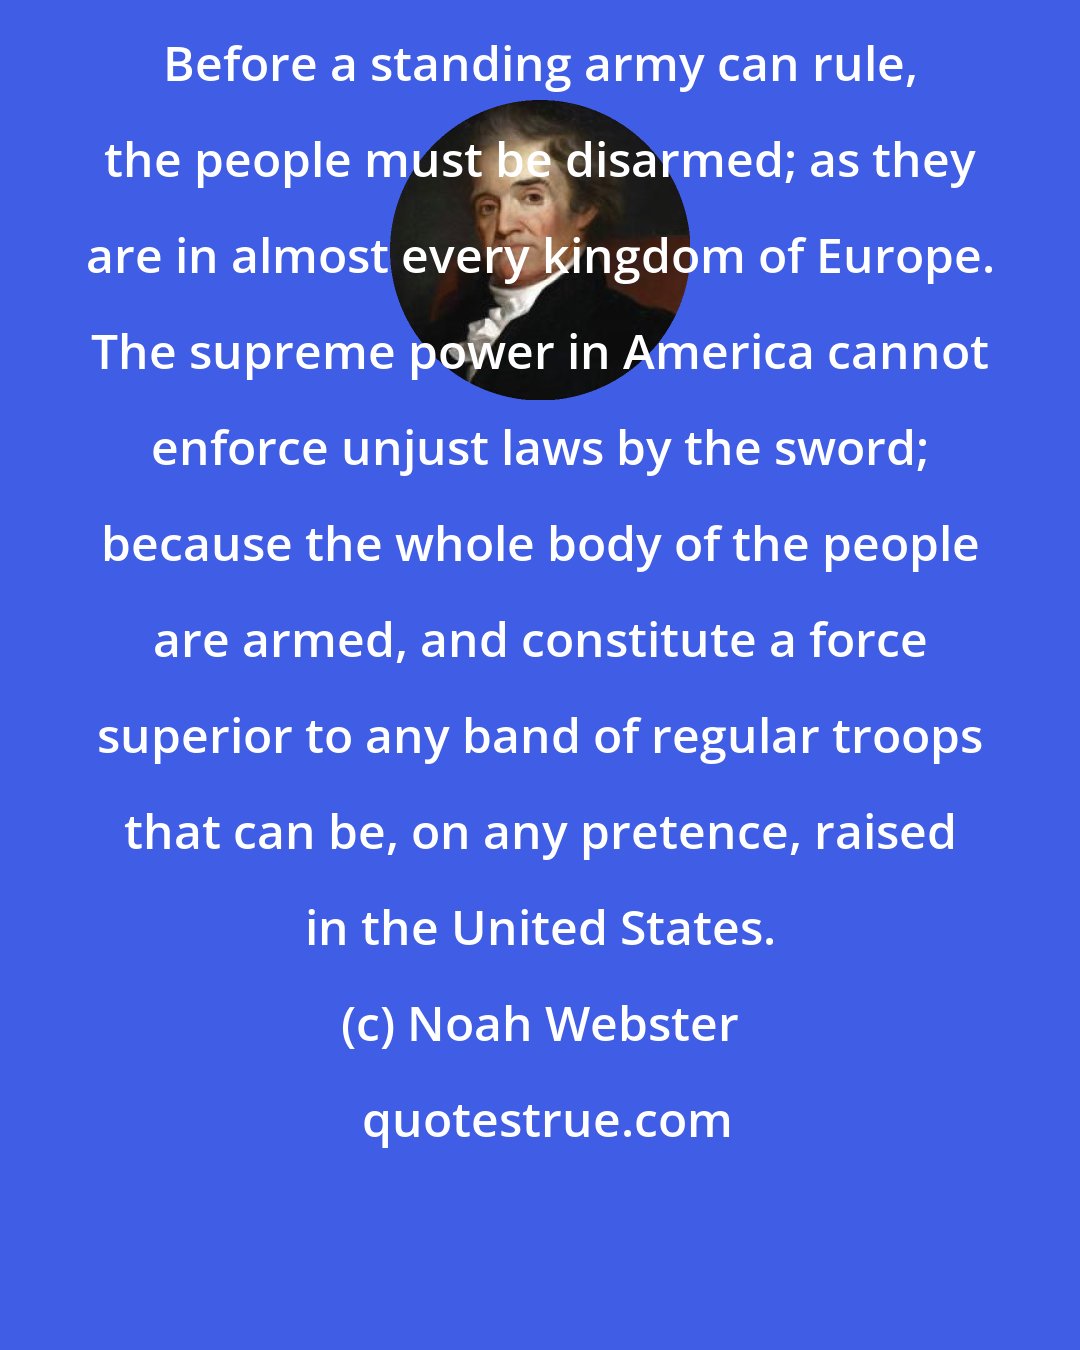 Noah Webster: Before a standing army can rule, the people must be disarmed; as they are in almost every kingdom of Europe. The supreme power in America cannot enforce unjust laws by the sword; because the whole body of the people are armed, and constitute a force superior to any band of regular troops that can be, on any pretence, raised in the United States.